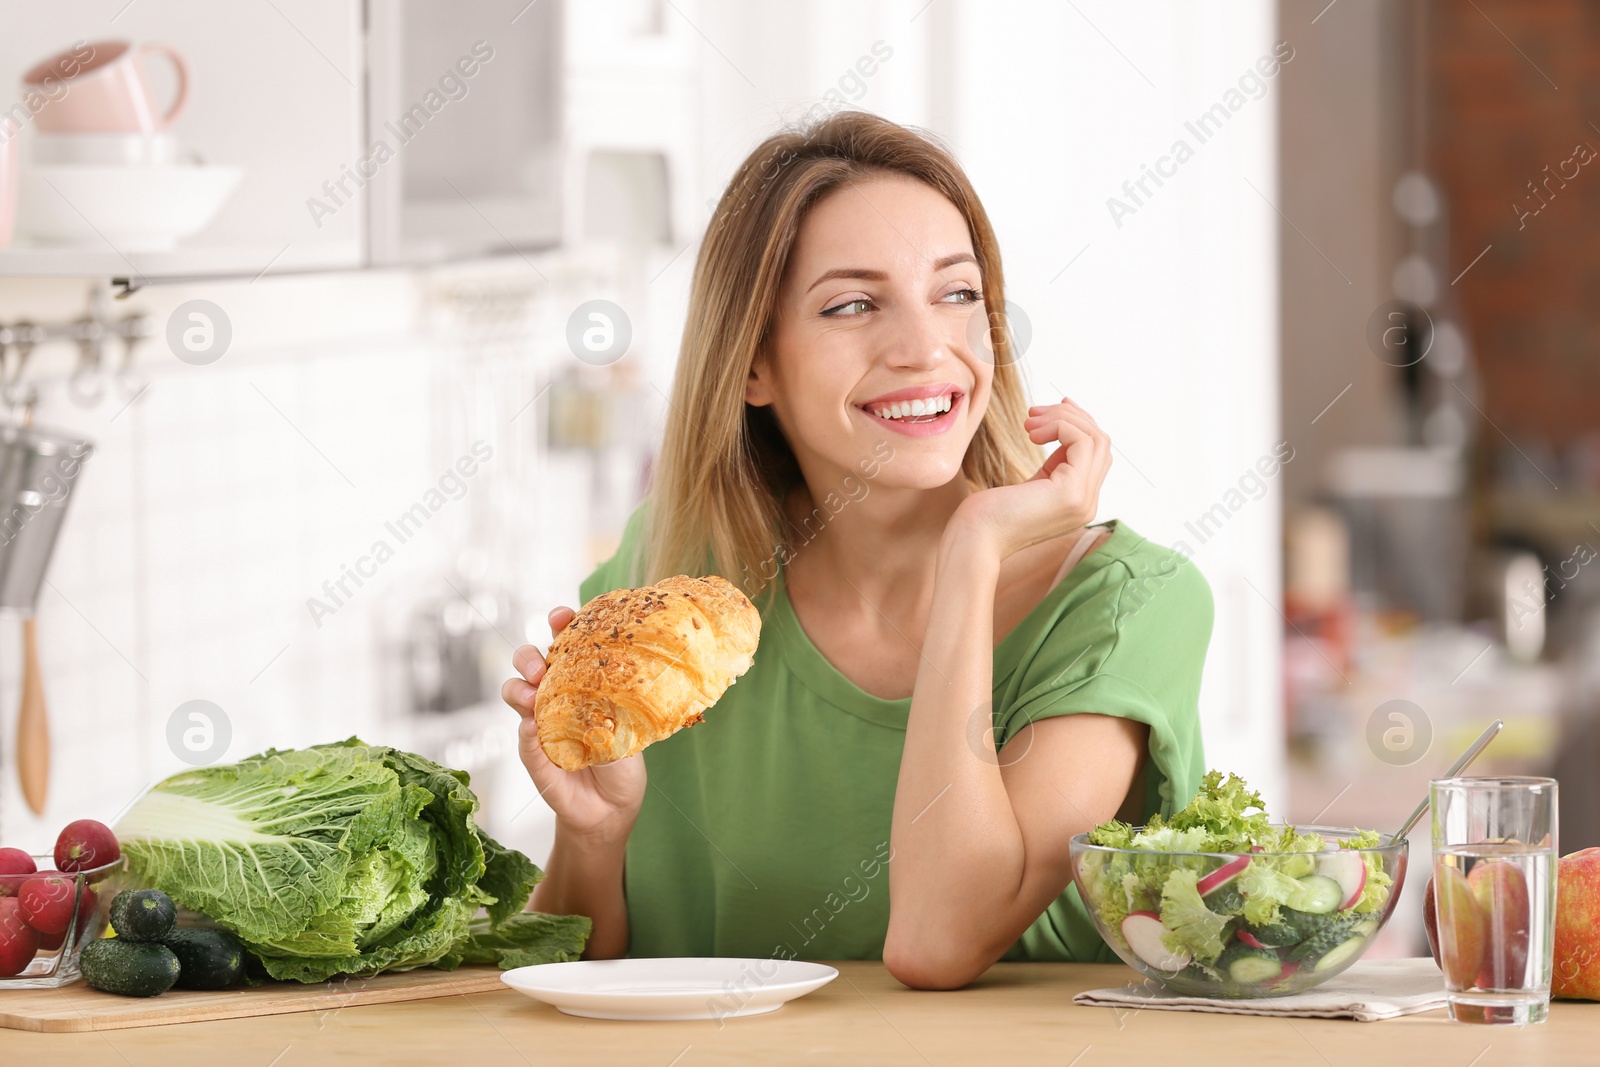 Photo of Woman eating croissant at table in kitchen. Diet failure